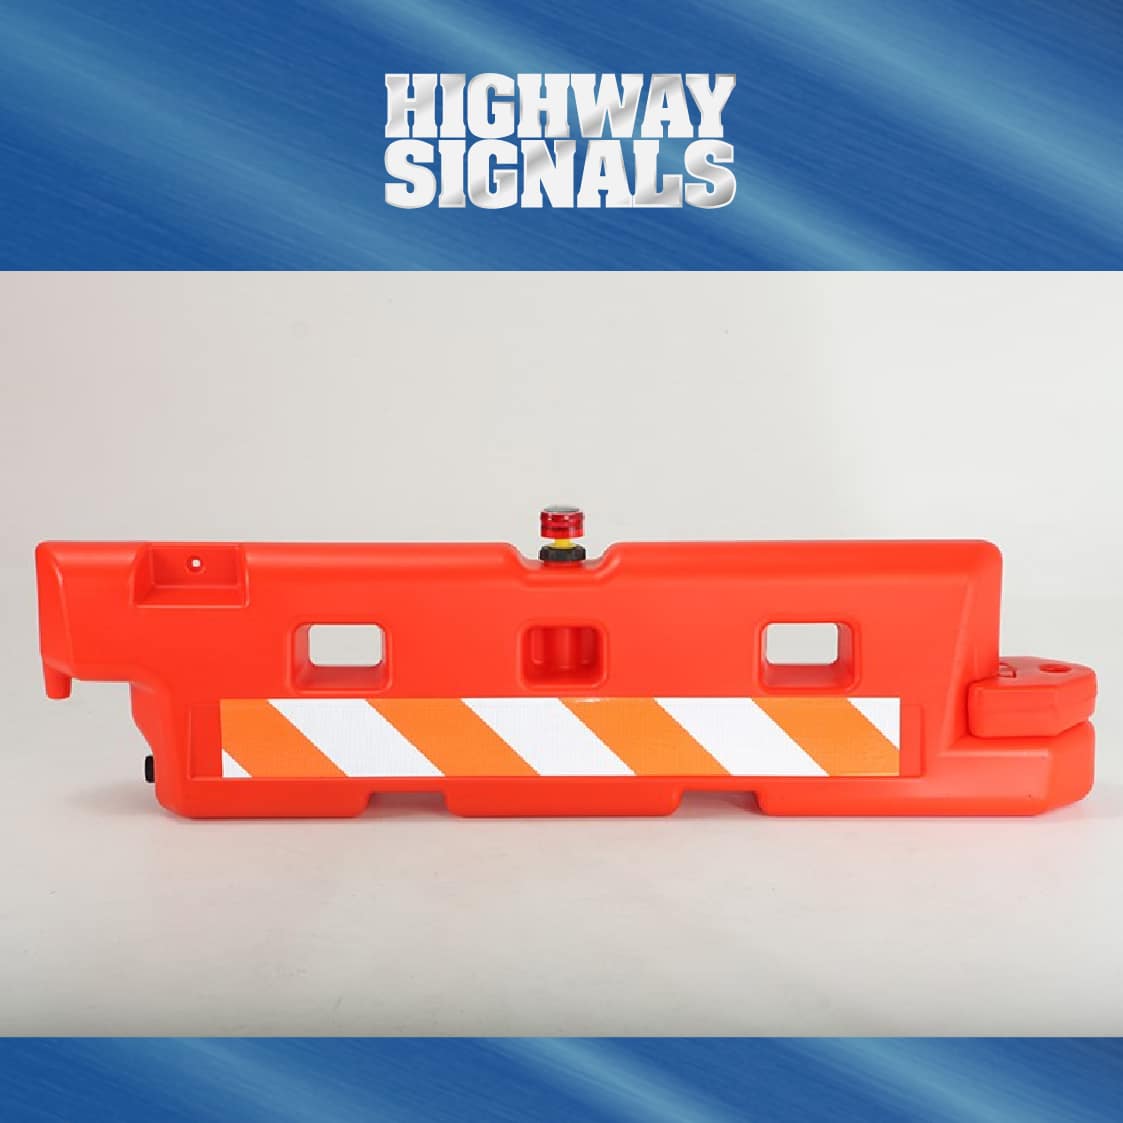 24 x 96 Low-Profile Airport Barricade - Frontal View